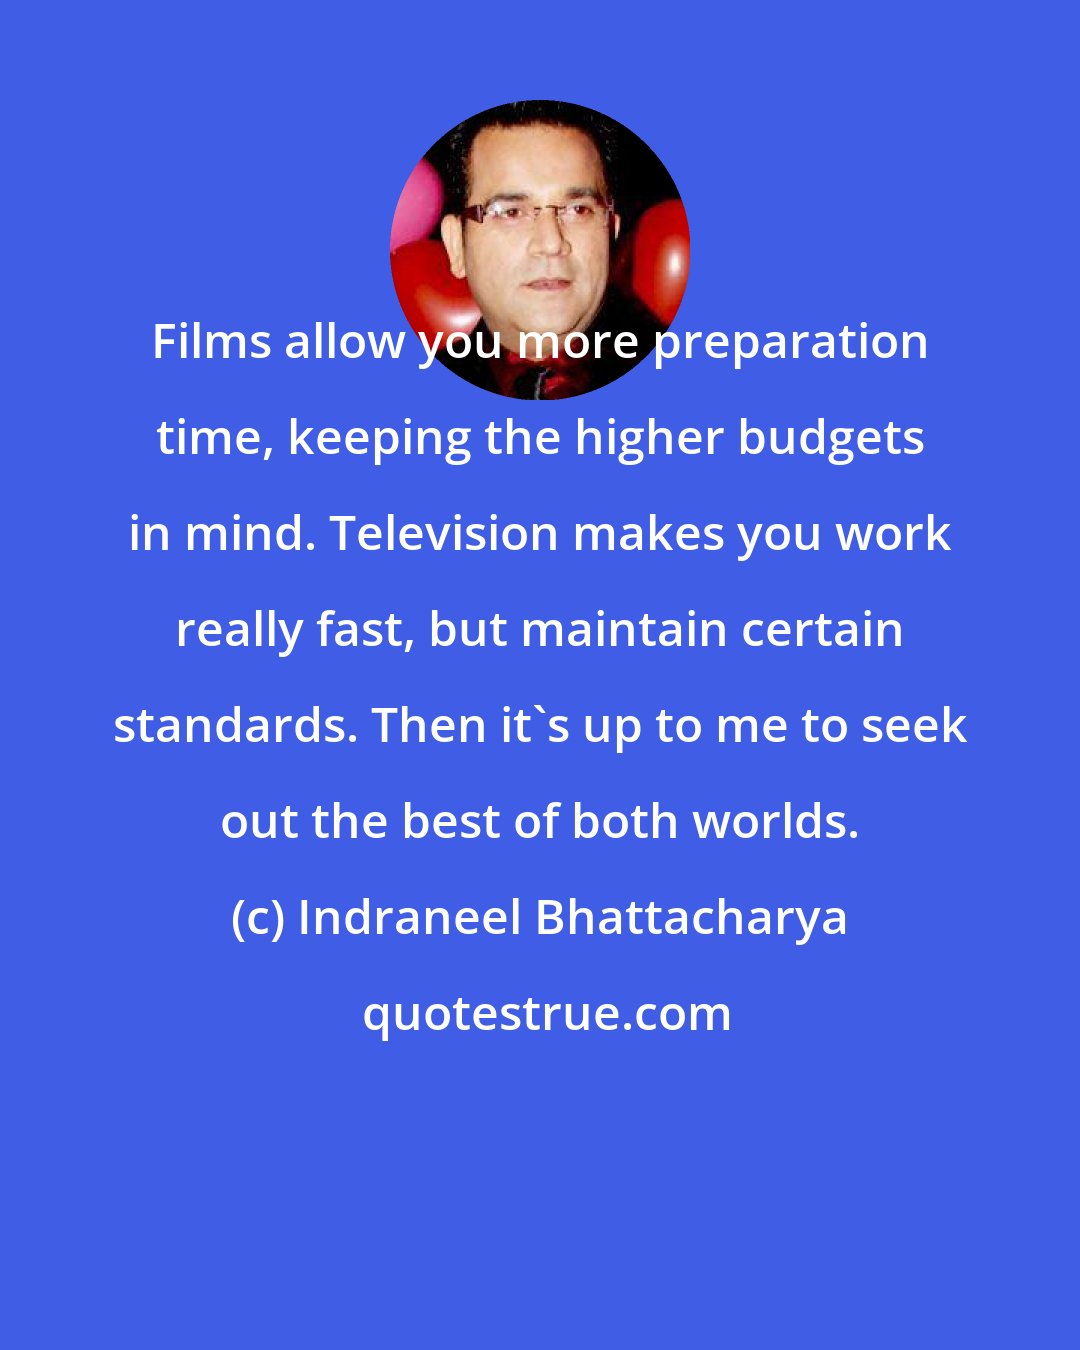 Indraneel Bhattacharya: Films allow you more preparation time, keeping the higher budgets in mind. Television makes you work really fast, but maintain certain standards. Then it's up to me to seek out the best of both worlds.